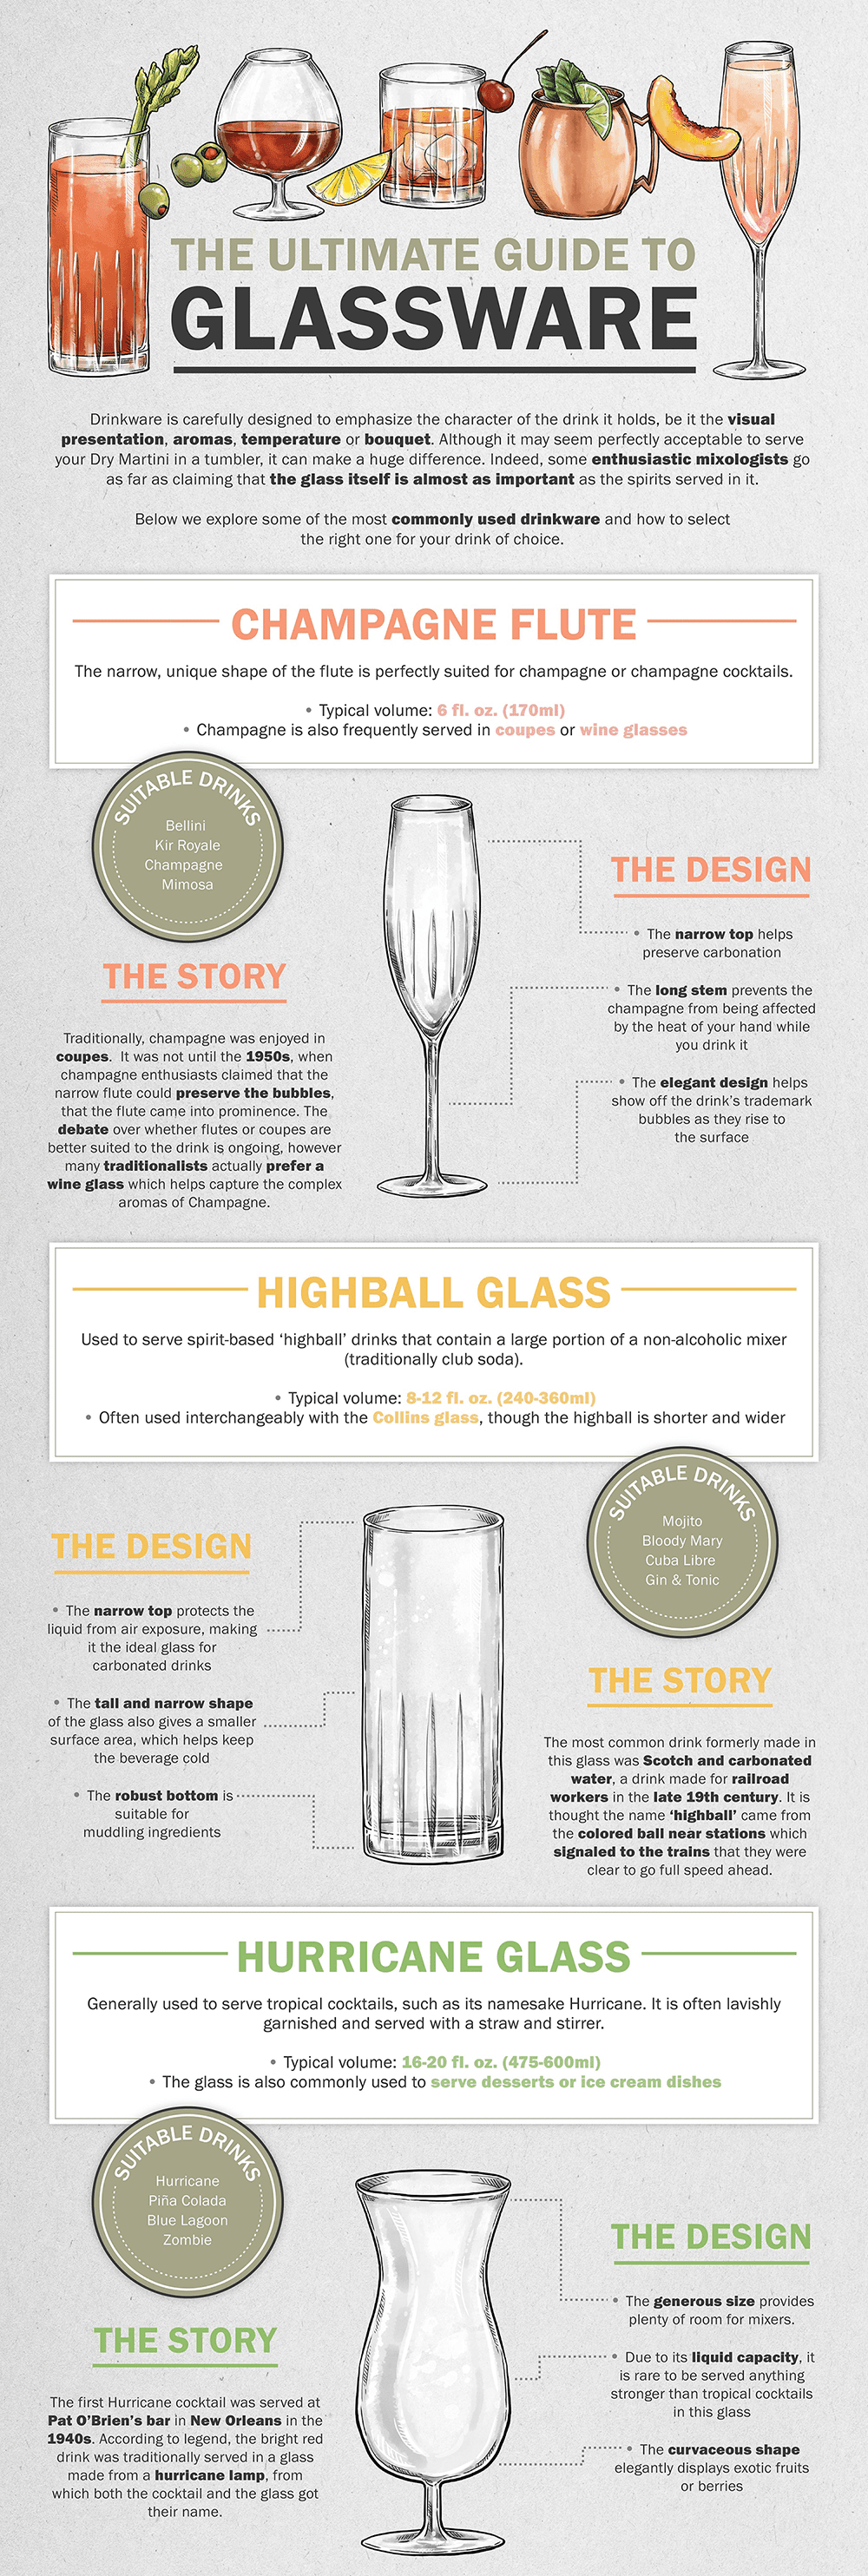 https://alesessions.files.wordpress.com/2017/05/glassware_1.png